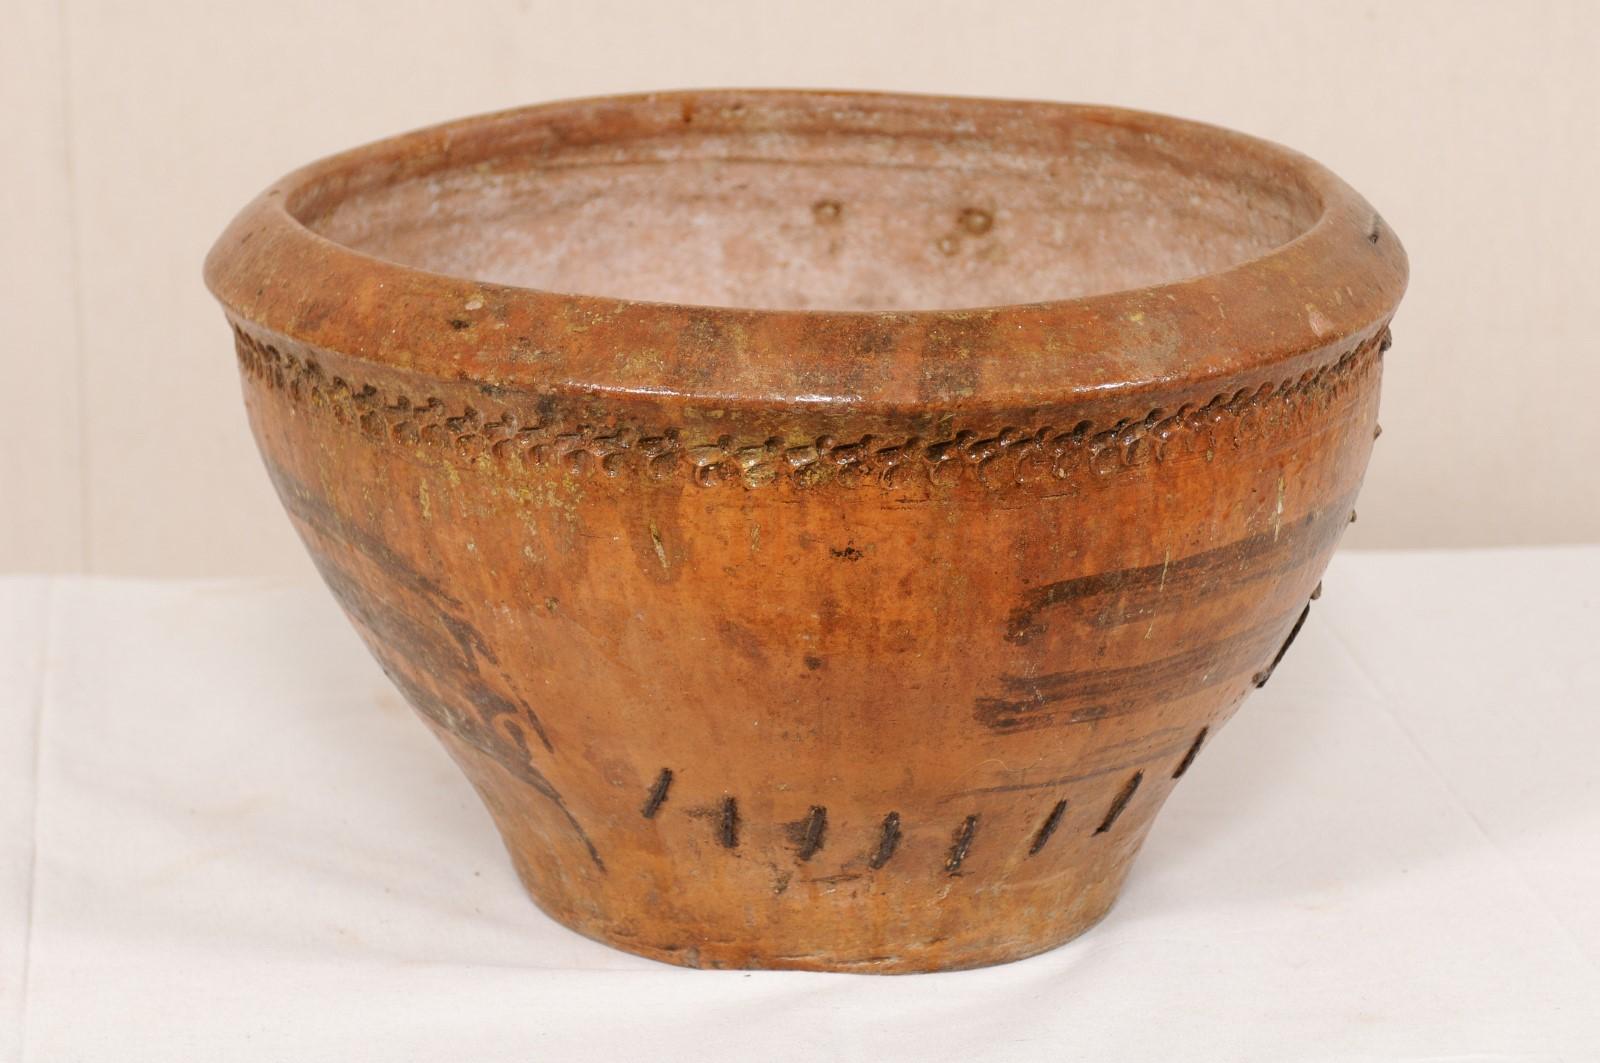 A Spanish clay pot with spout from the 19th century. This antique round-shaped vessel from Spain is wider towards it's top and mid-section, becoming more narrow towards it's bottom, with a single spout at one lower side, and resting upon a flattened